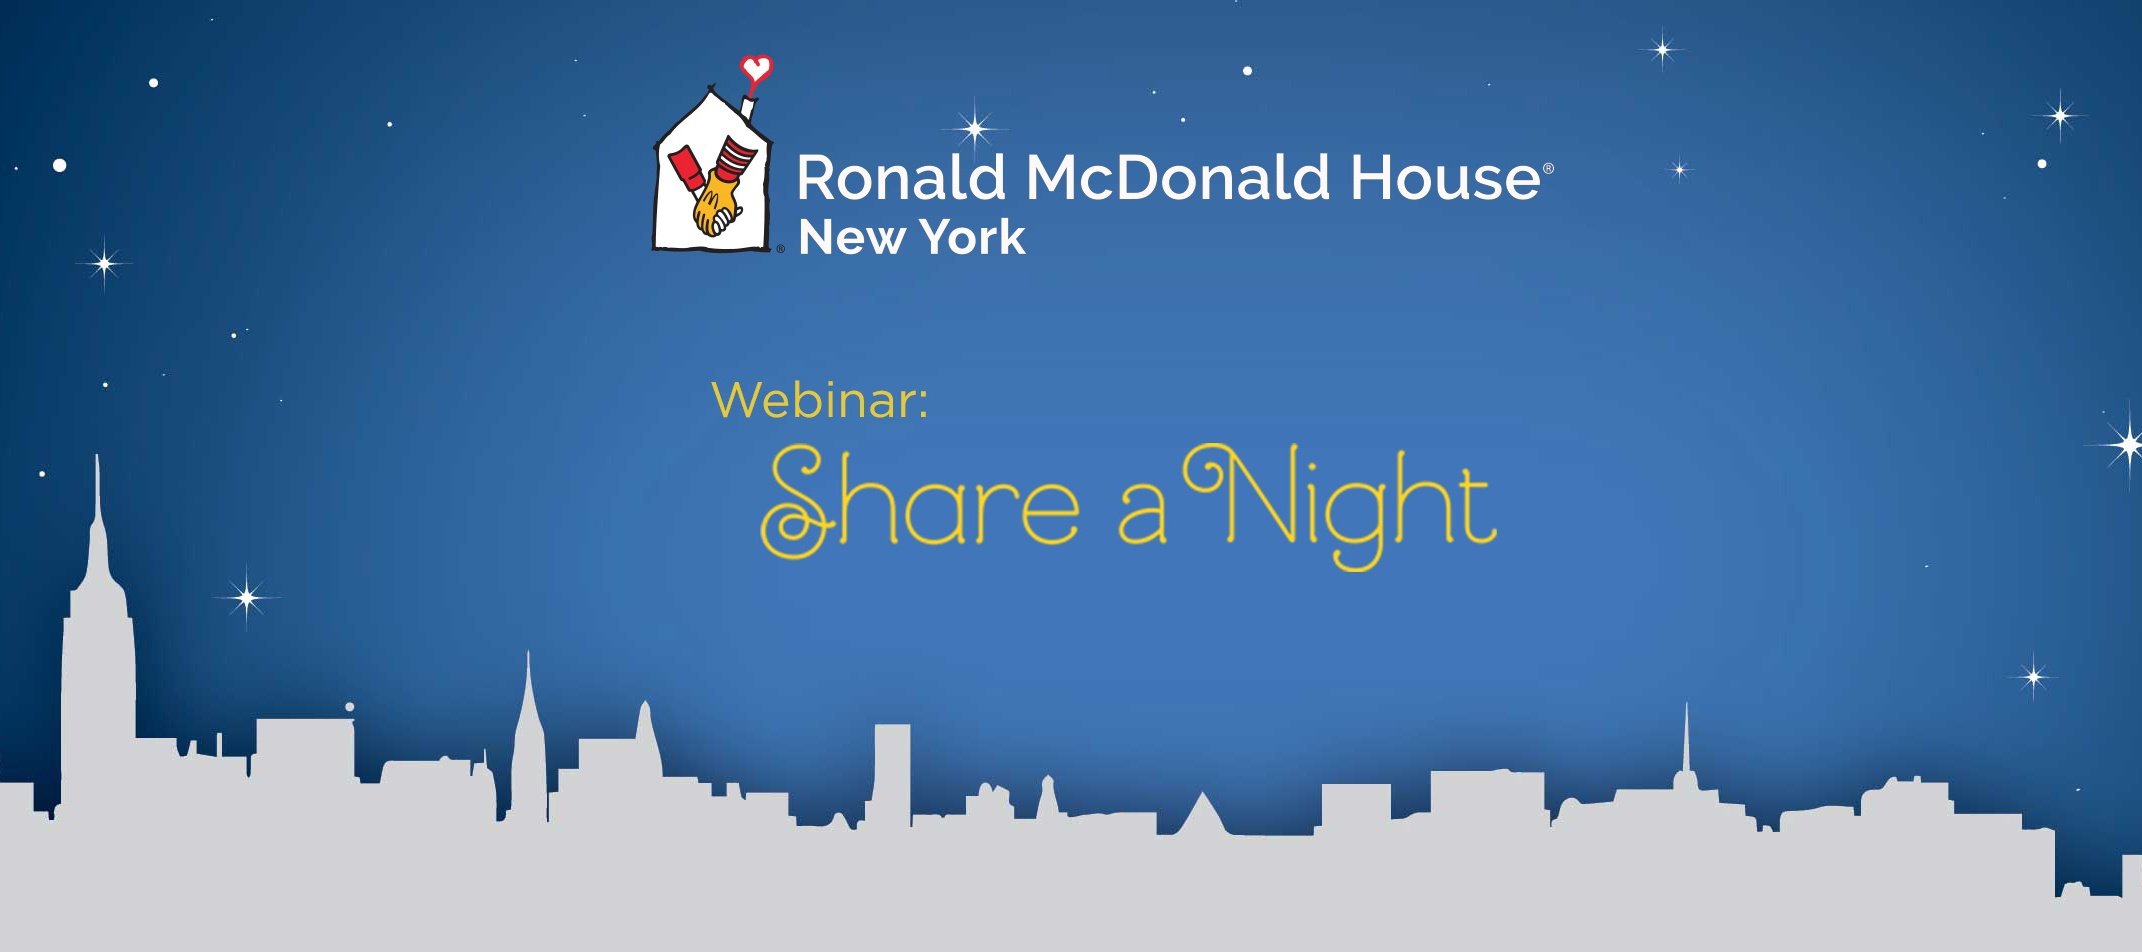 Share-a-Night-Webinar-Heroic-Fundraising-Featured-Image2-1-1